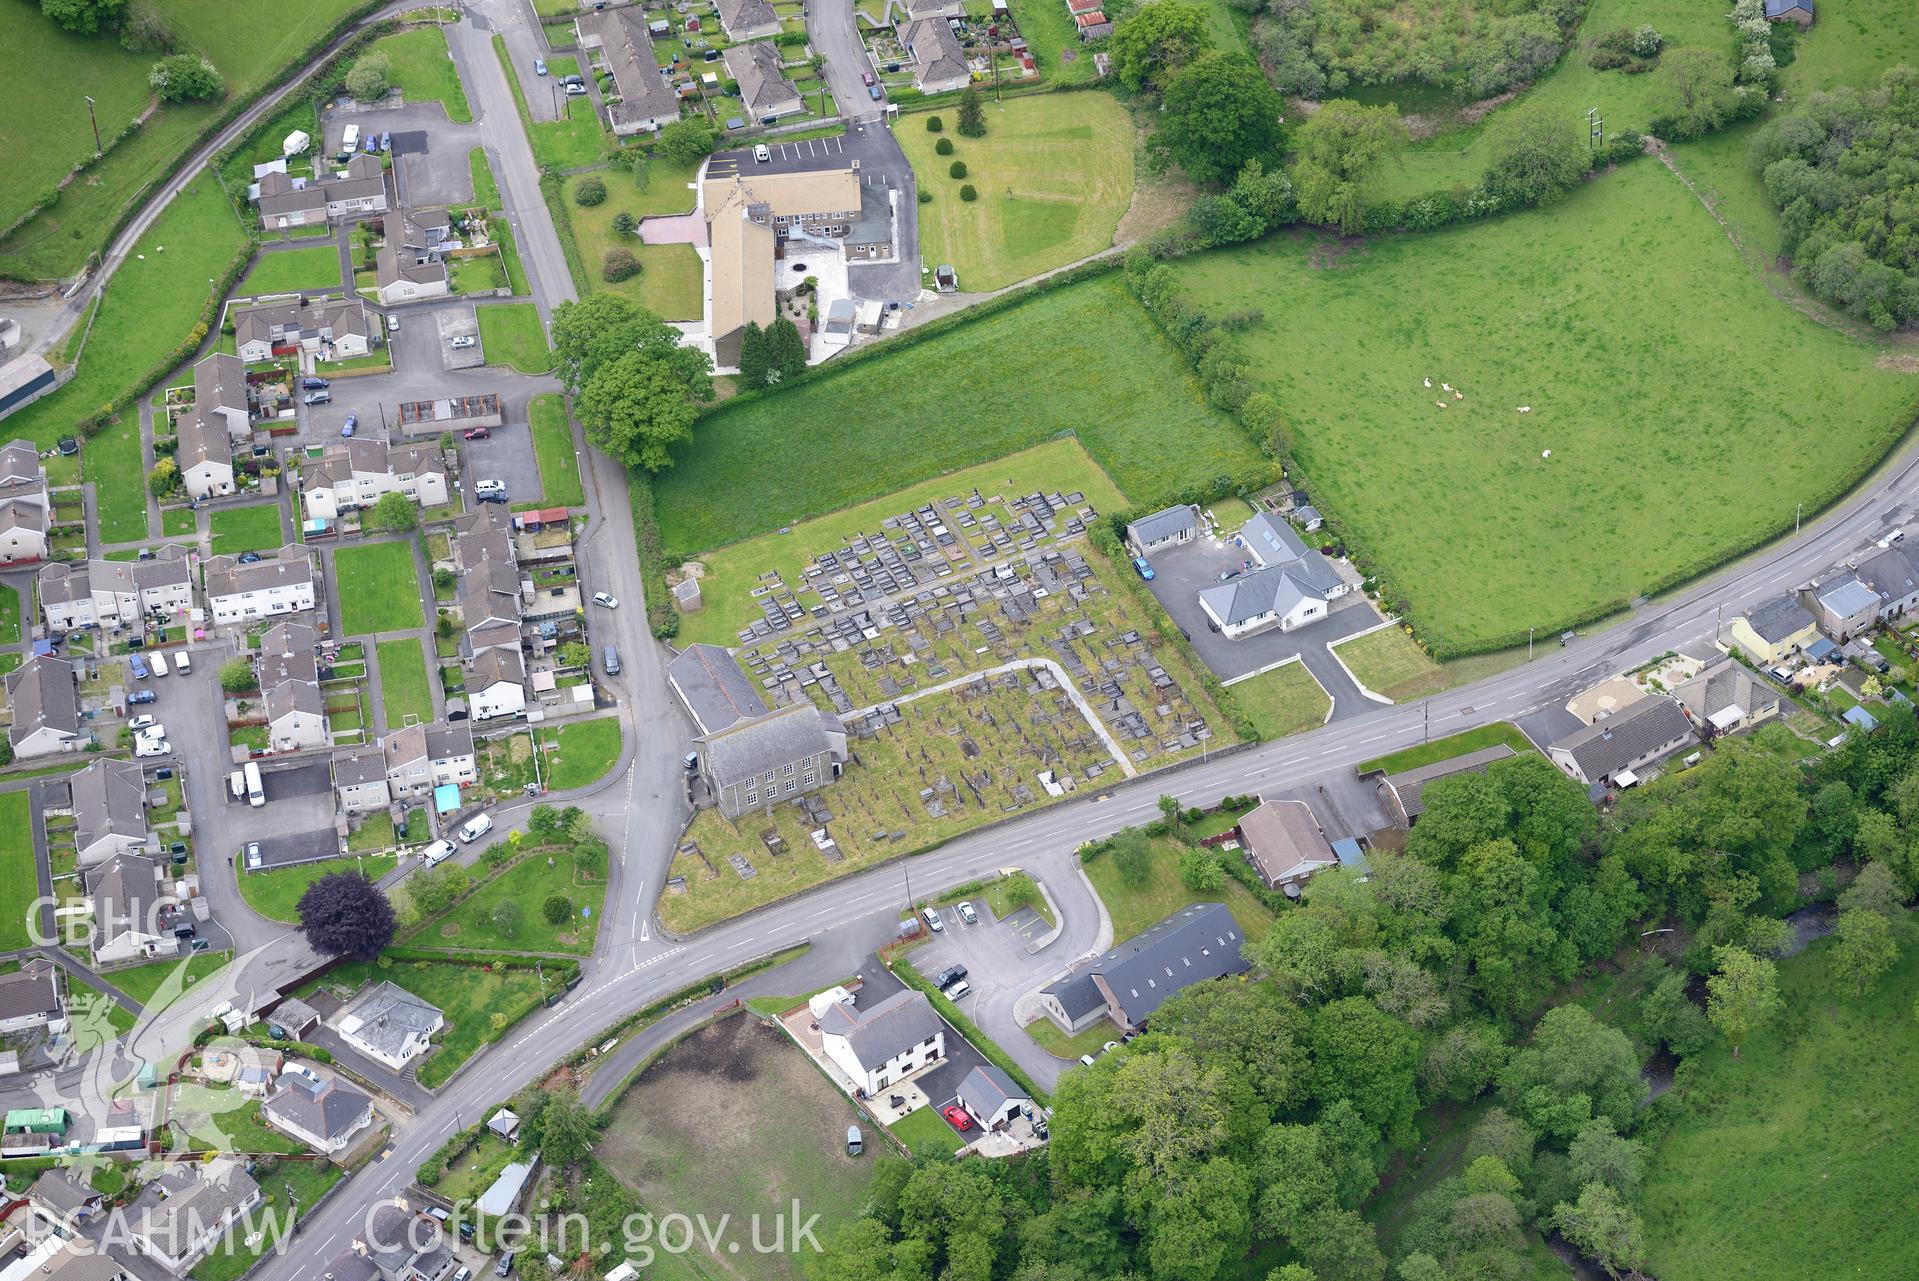 Aberduar Welsh Baptist Church at Llanybydder. Oblique aerial photograph taken during the Royal Commission's programme of archaeological aerial reconnaissance by Toby Driver on 3rd June 2015.